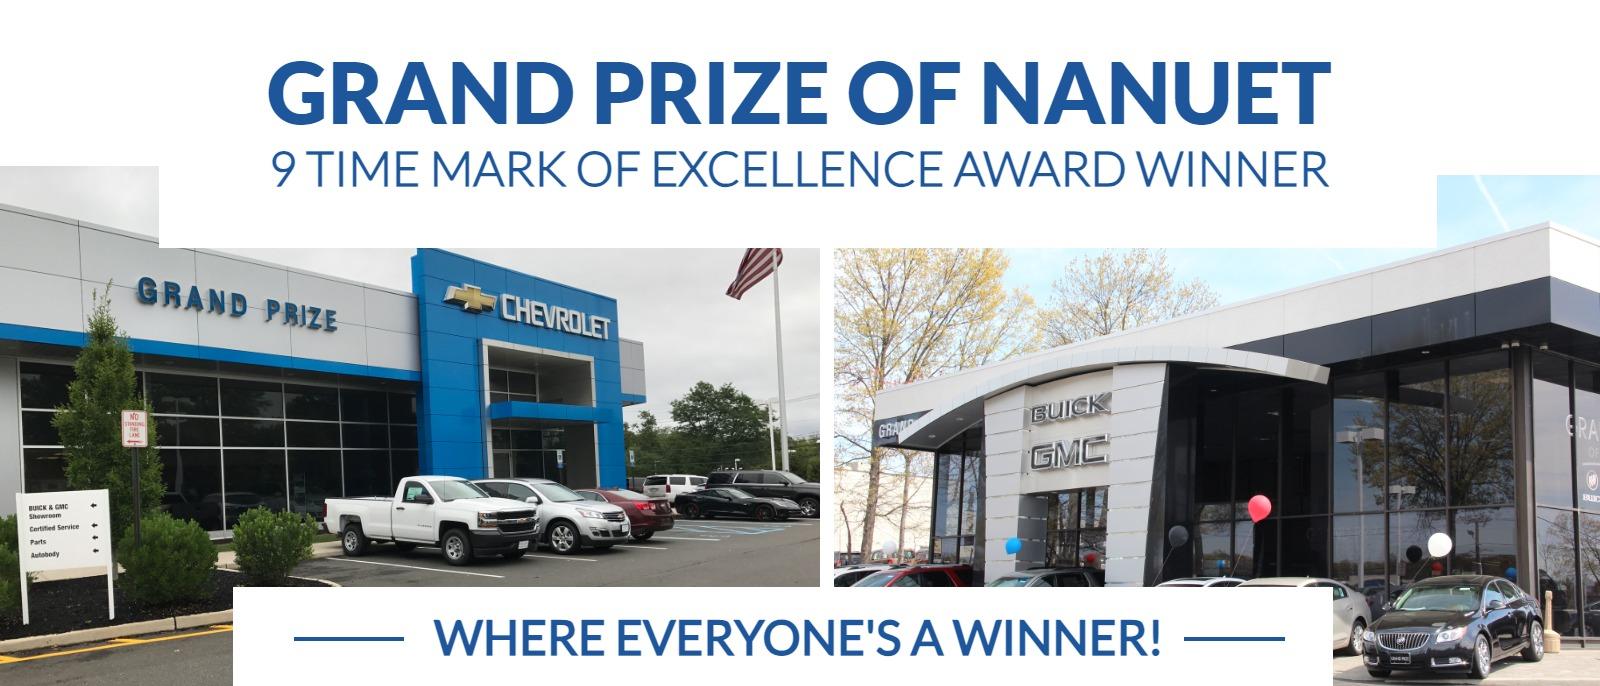 Grand Prize of Nanuet | 9 Time Mark of Excellence Award Winner| Where Everyone's A Winner!